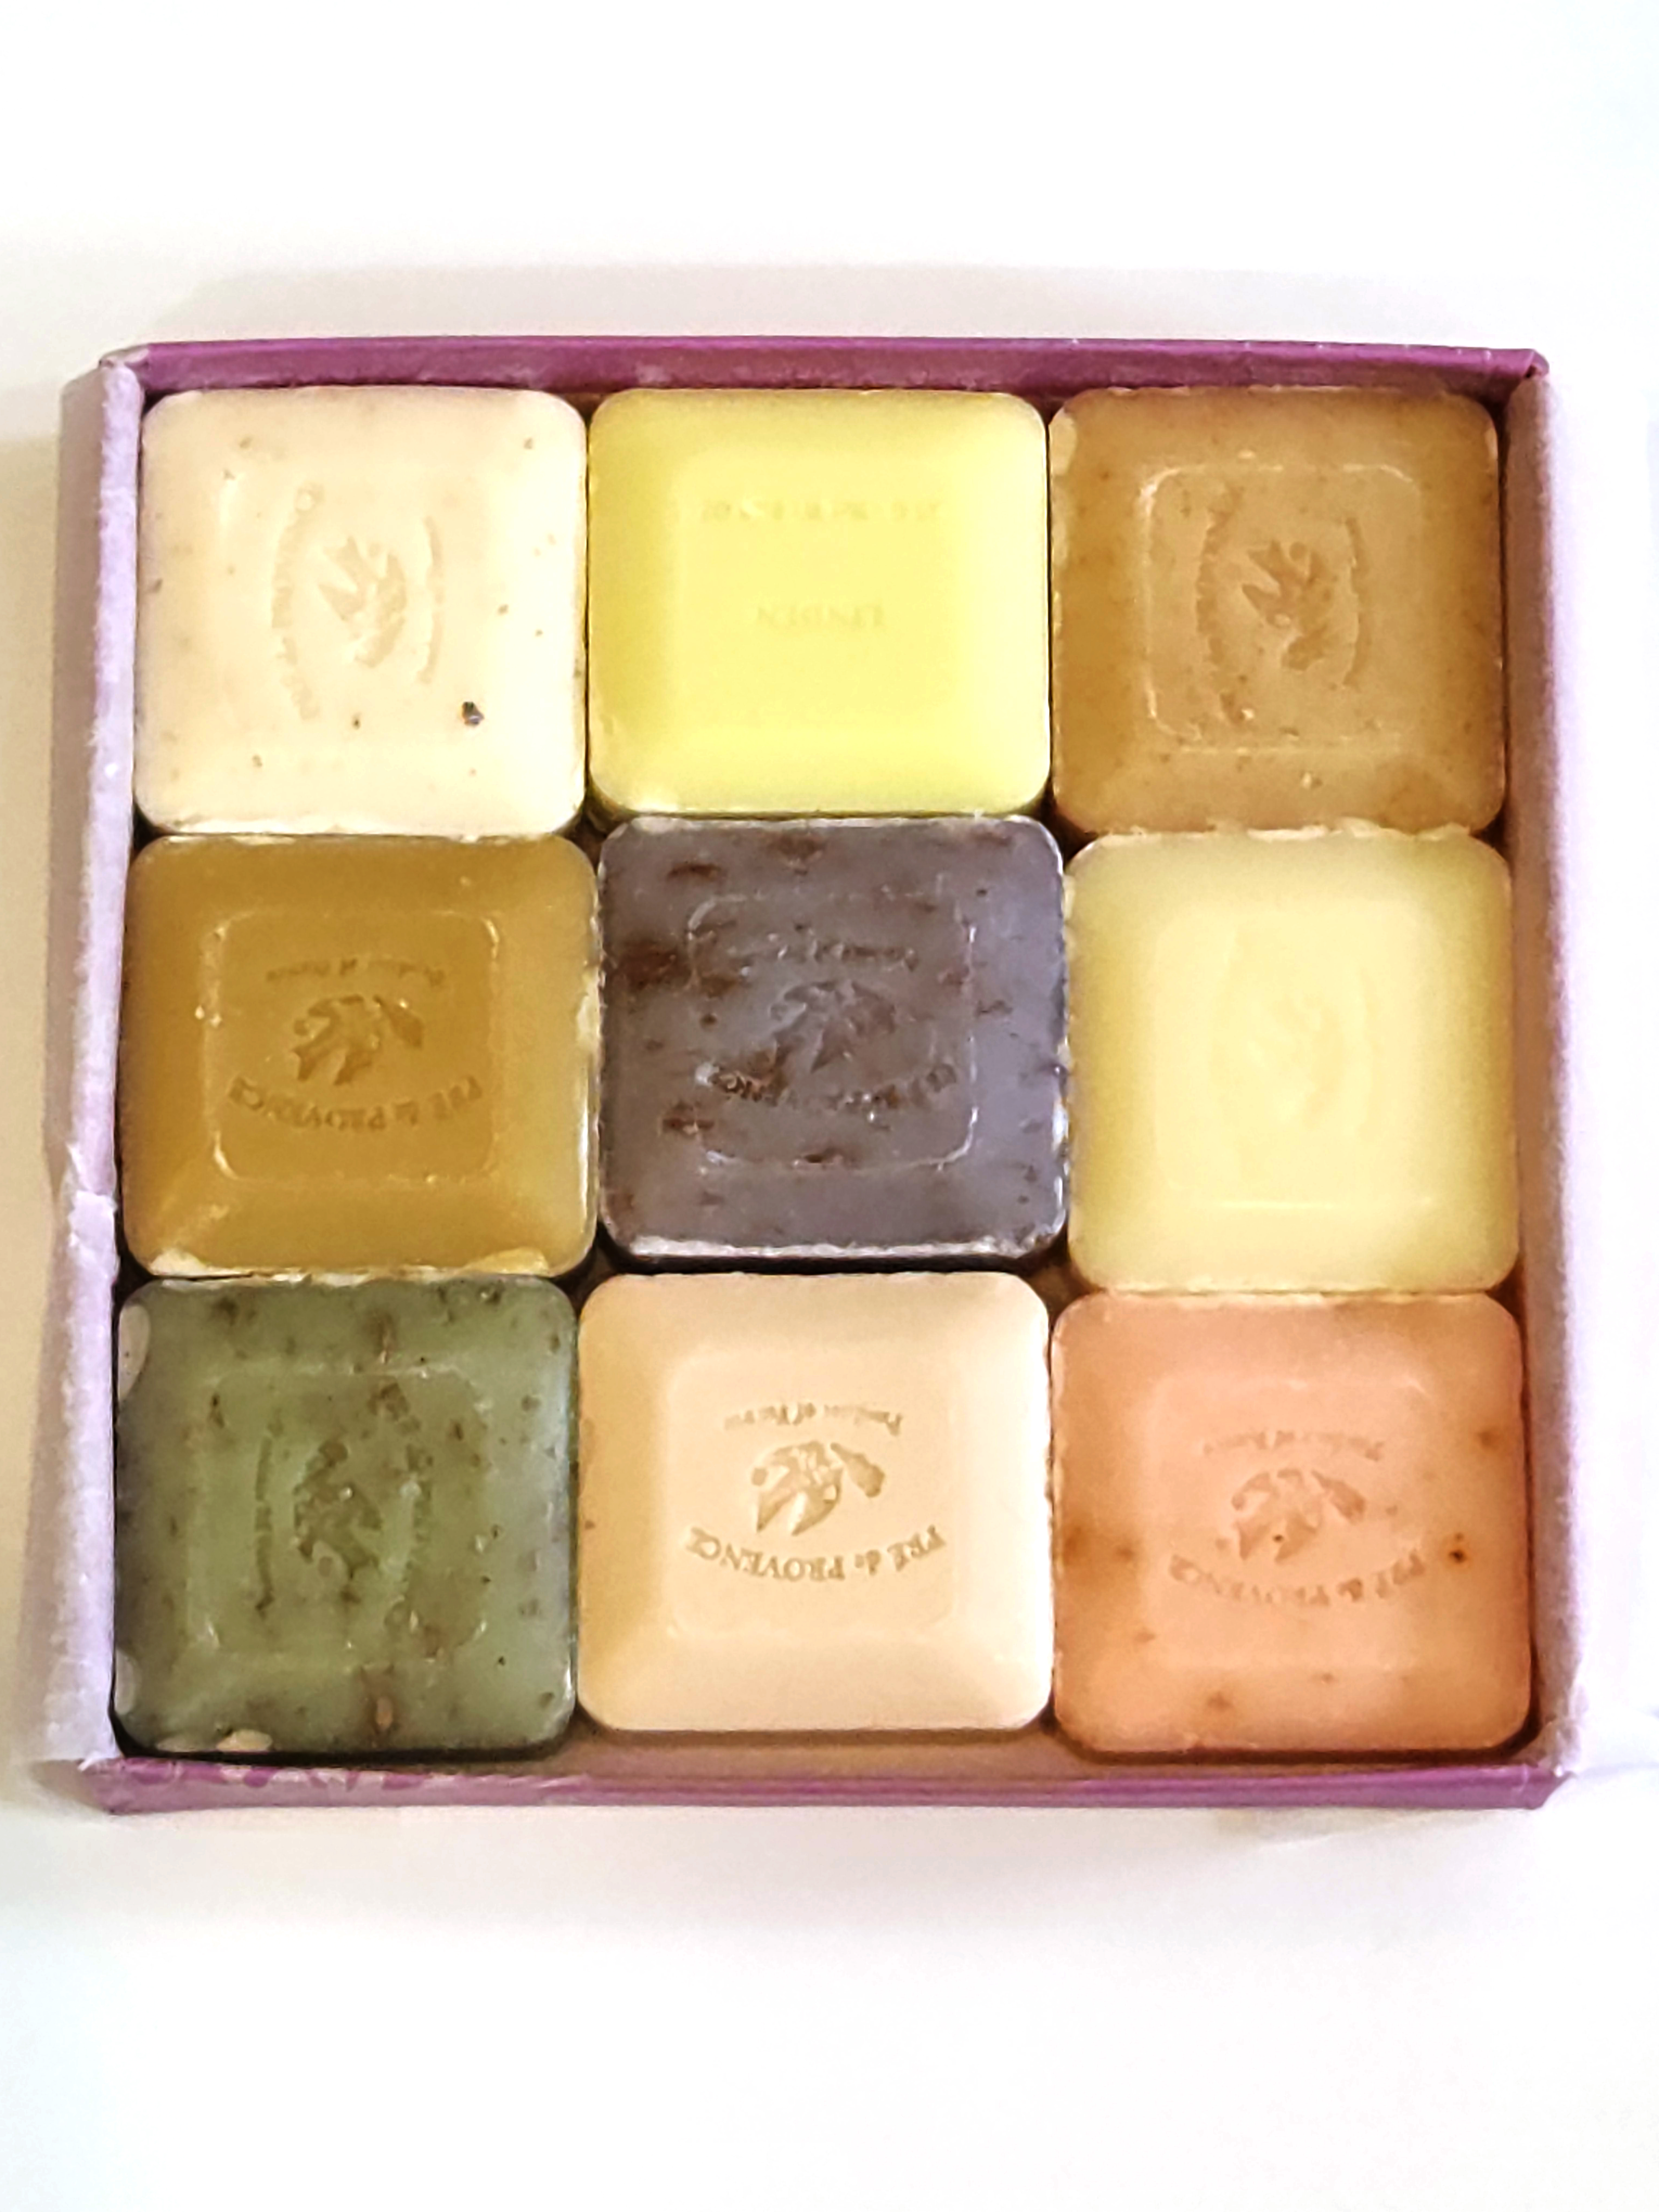 Shea butter enriched soaps from France from a company named Pre’ De Provence